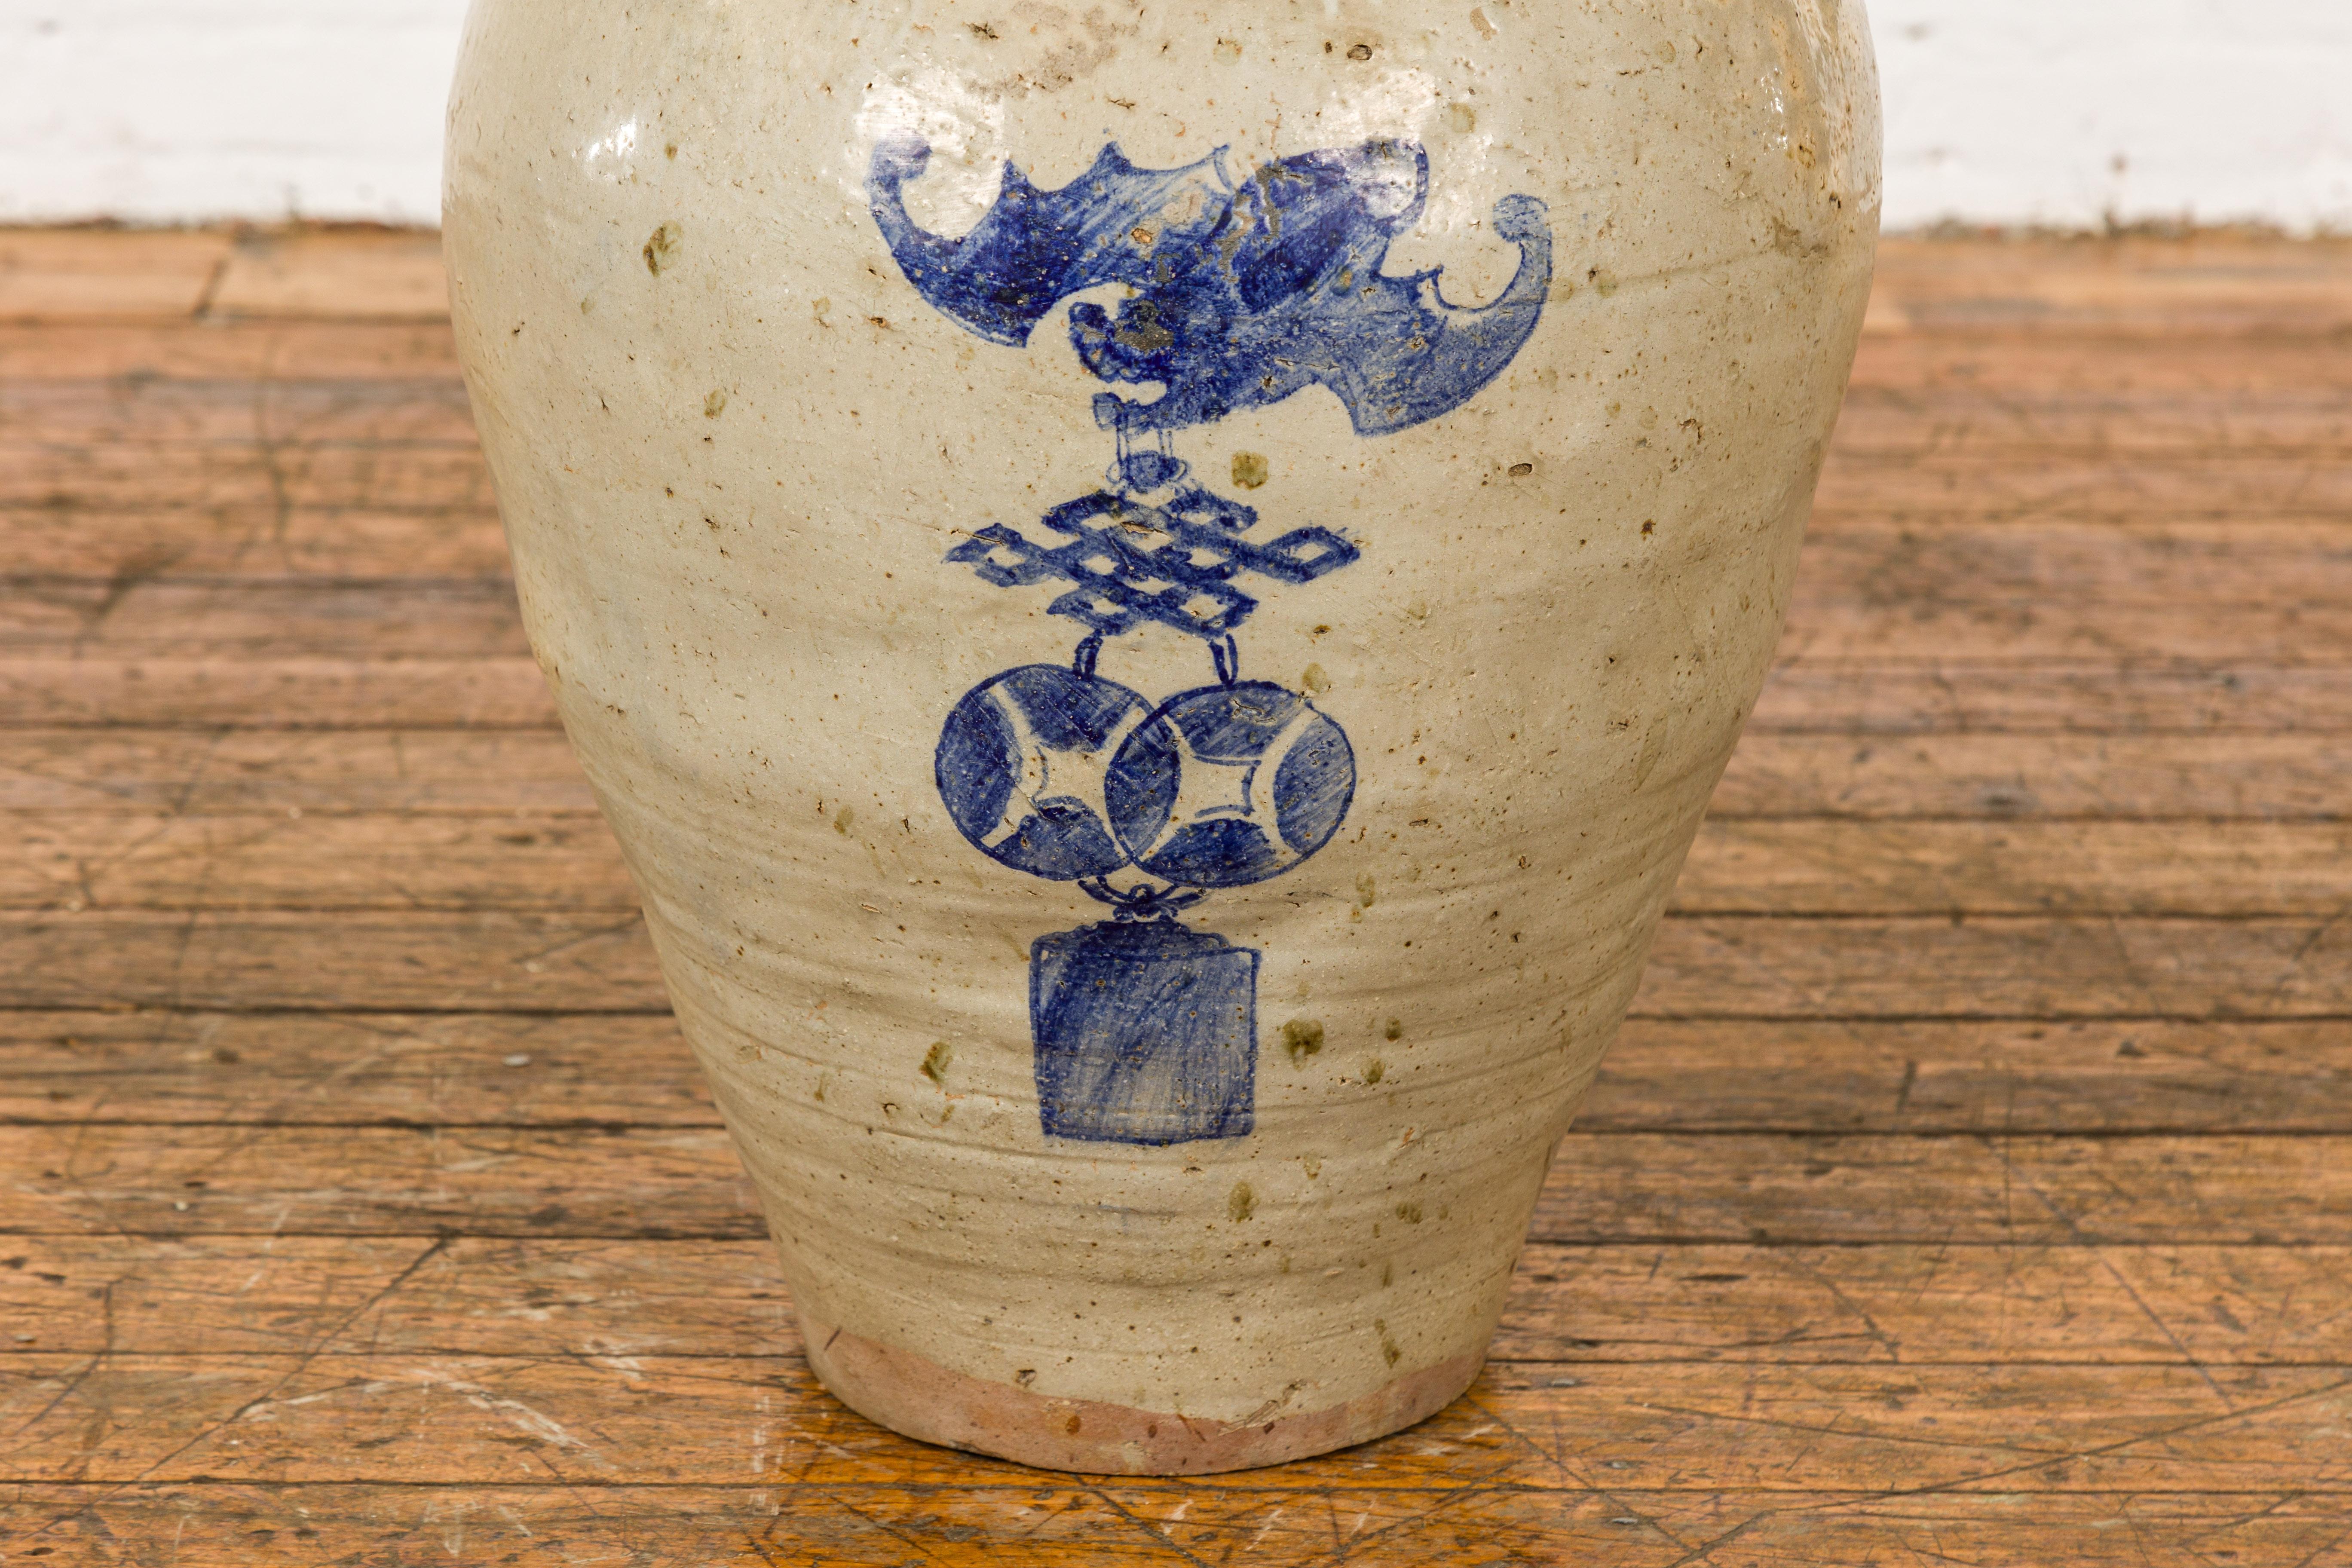 Antique Chinese Glazed Ceramic Storage Jar with Blue Painted Motifs For Sale 3